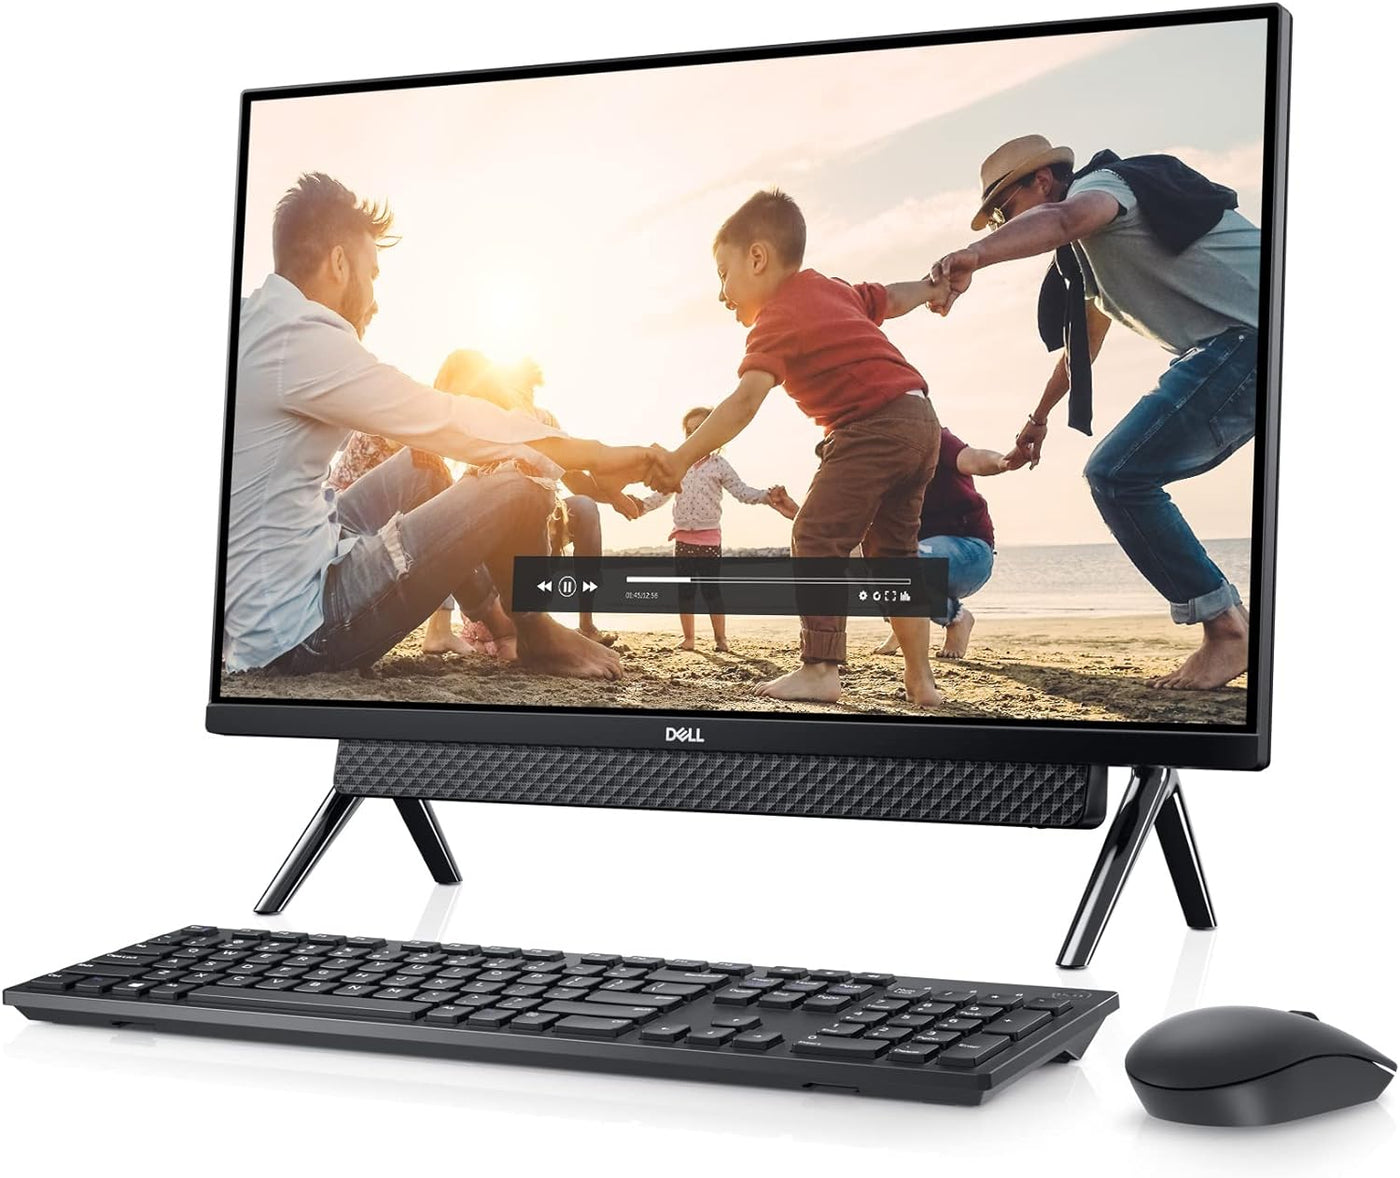 Dell Inspiron 7700 27-inch All in One Desktop Computer - FHD (1920 x 1080) Display - $779